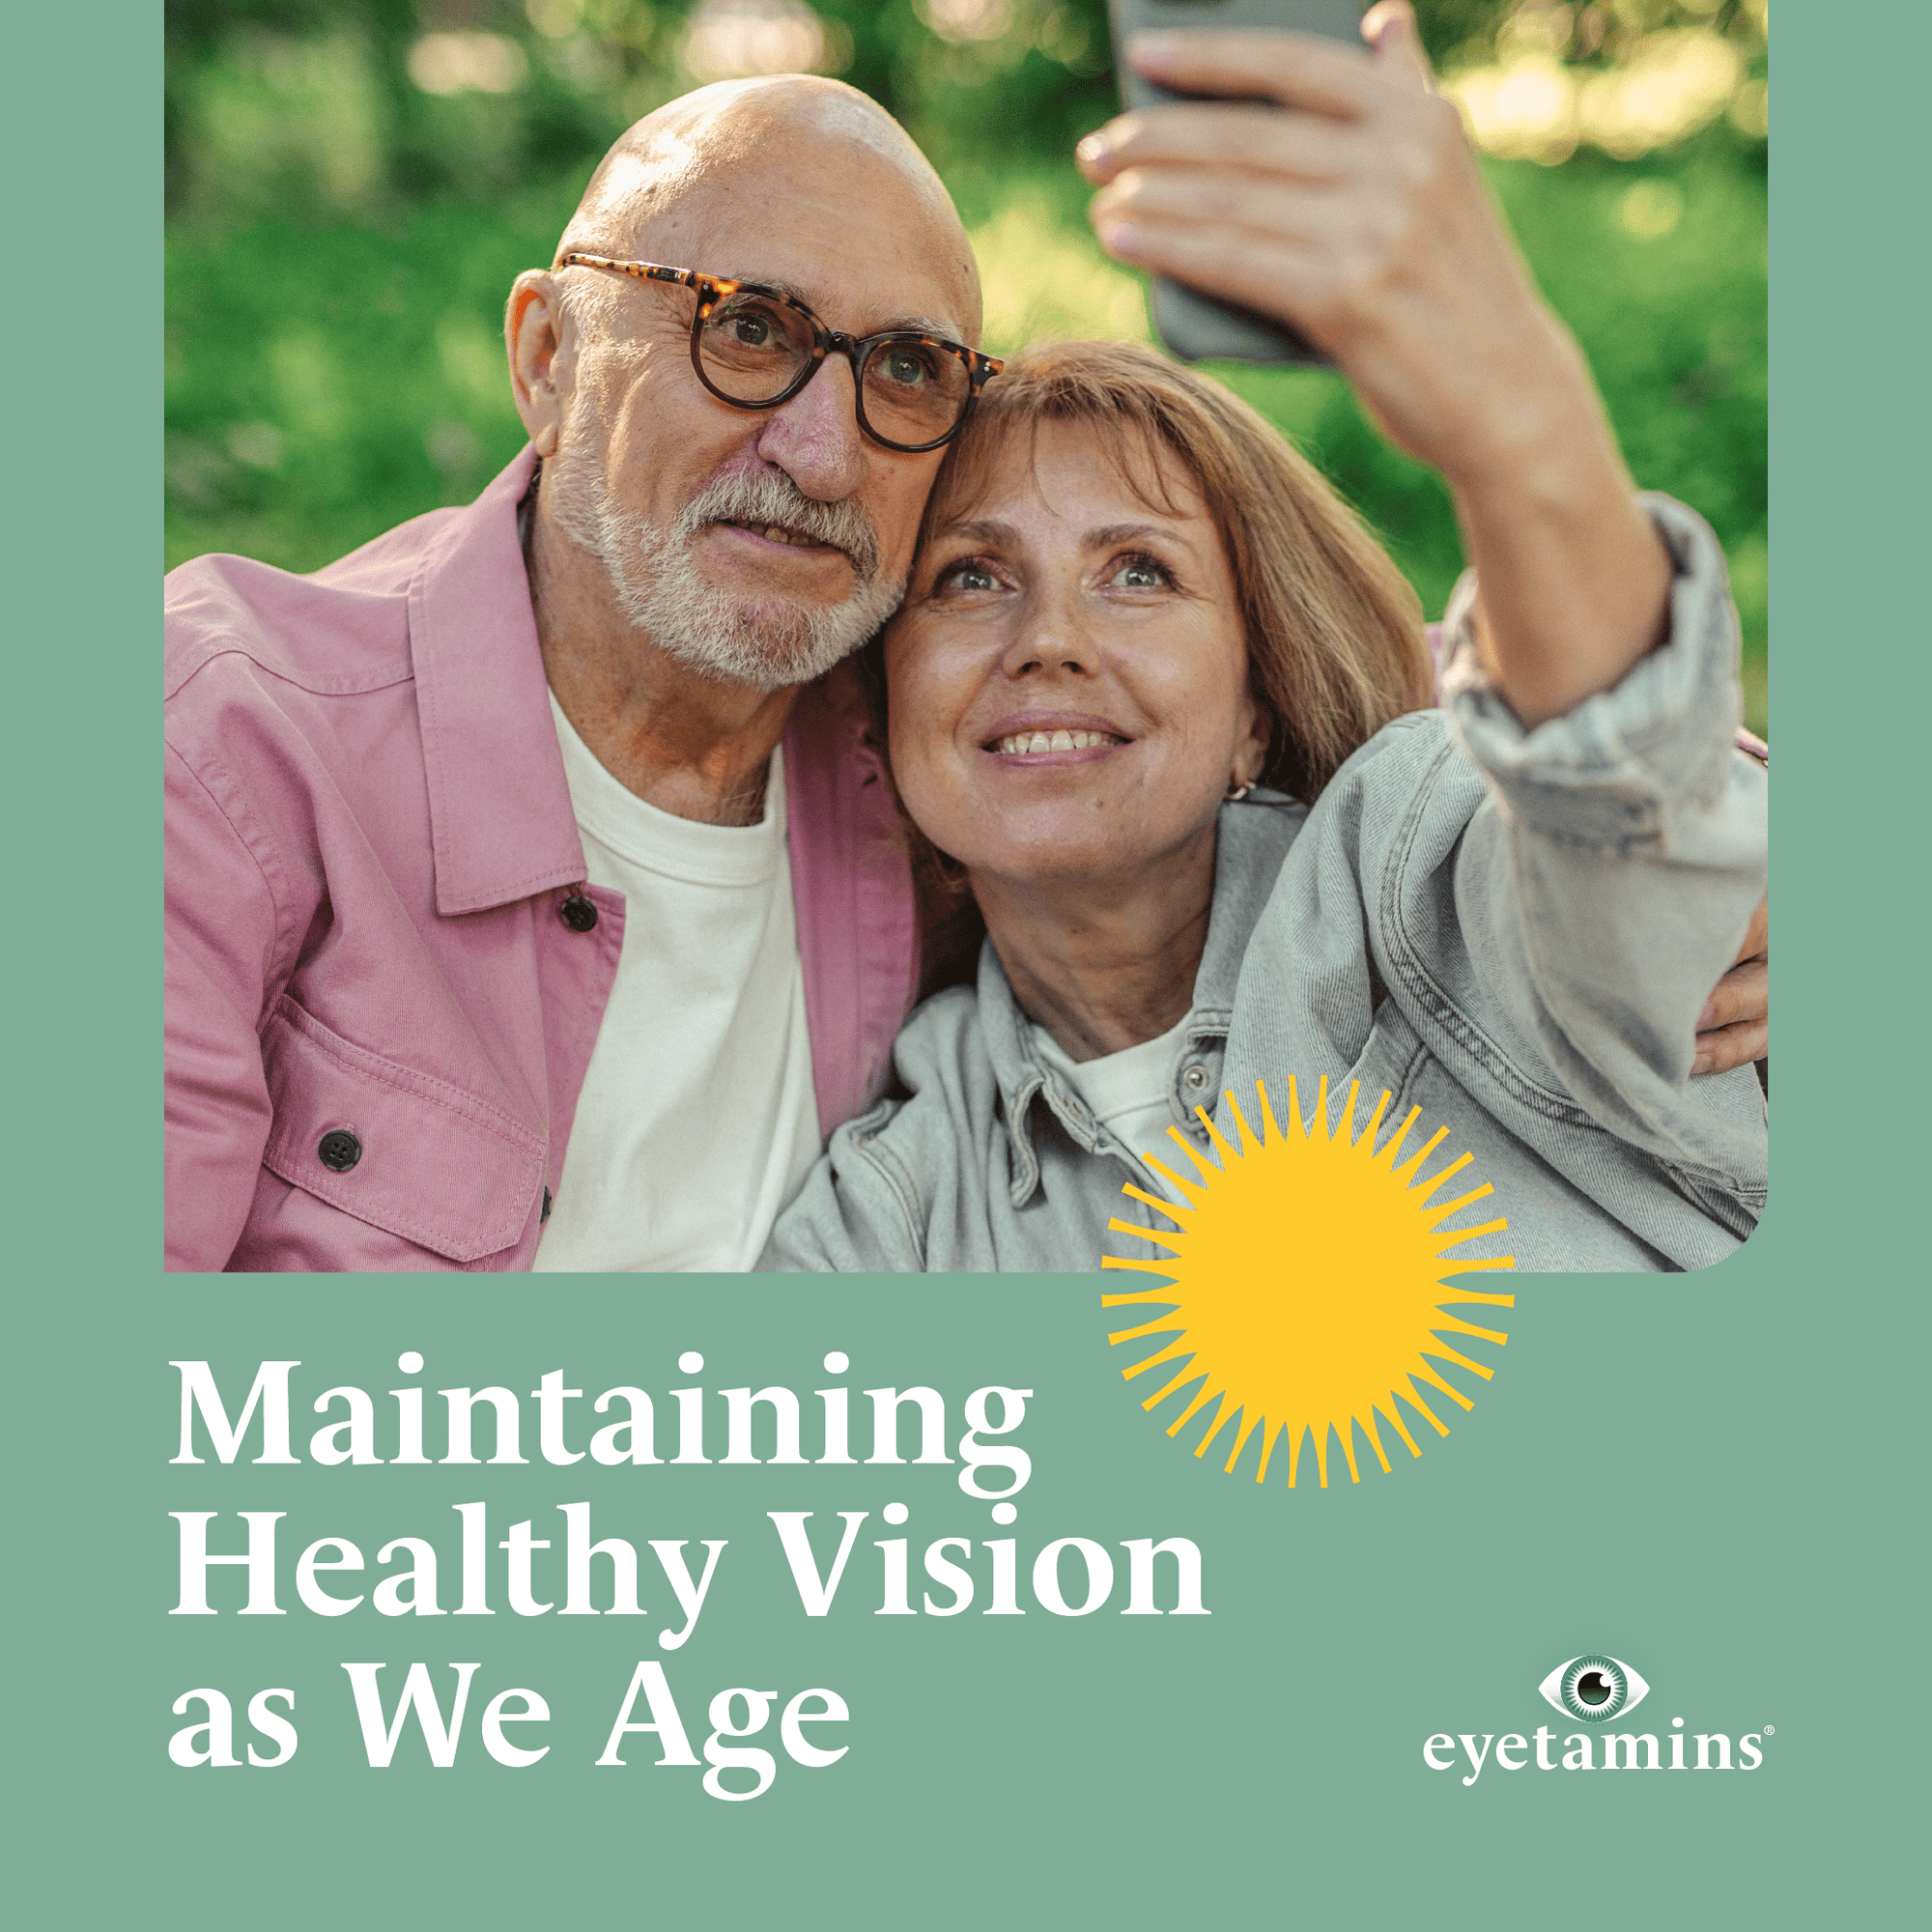 Eyetamins - Maintaining Healthy Vision as We Age